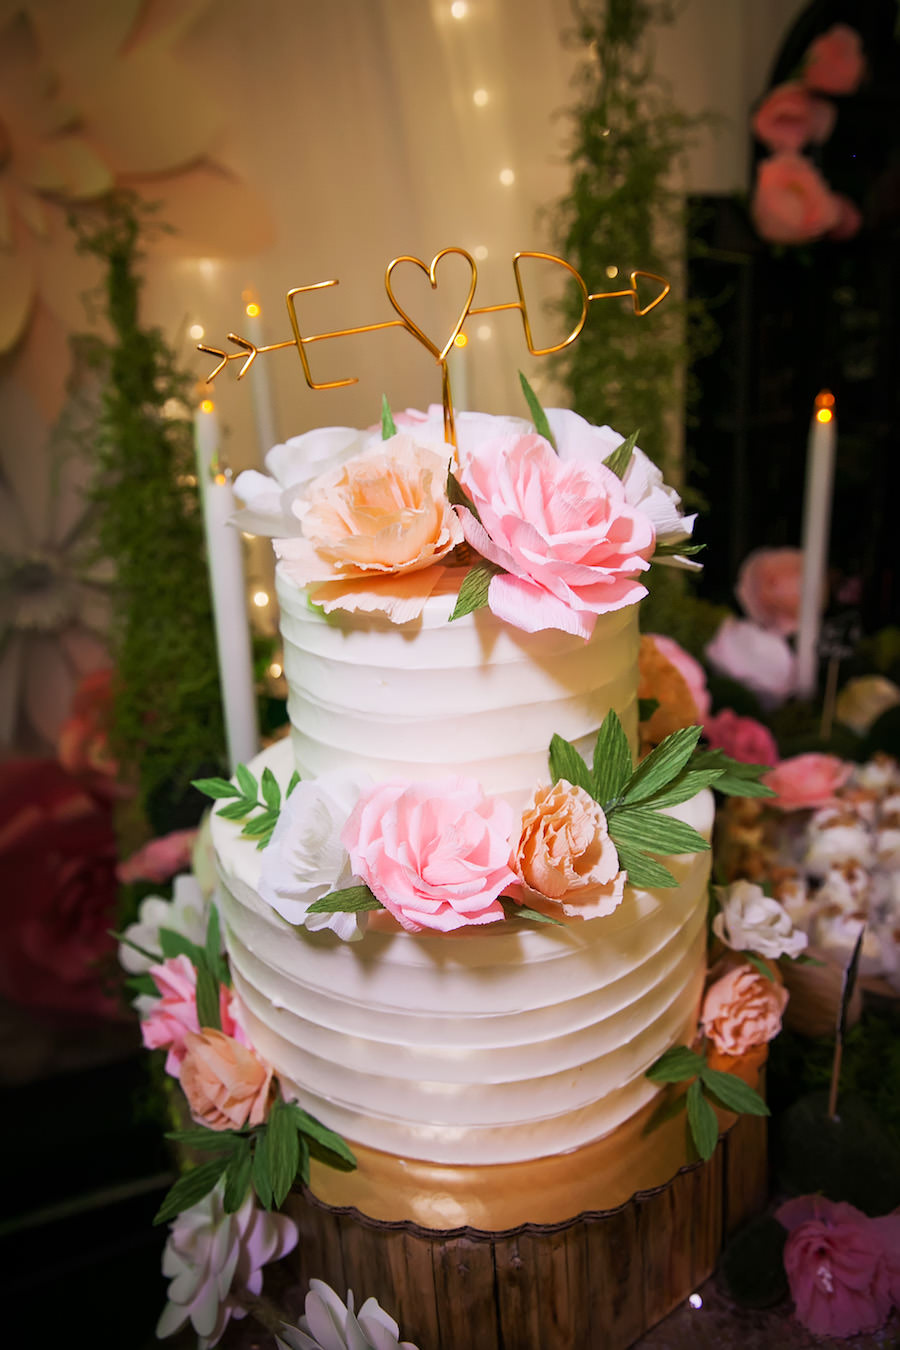 Two Tiered, Round, White Wedding Cake with Pink and Orange Floral Accents